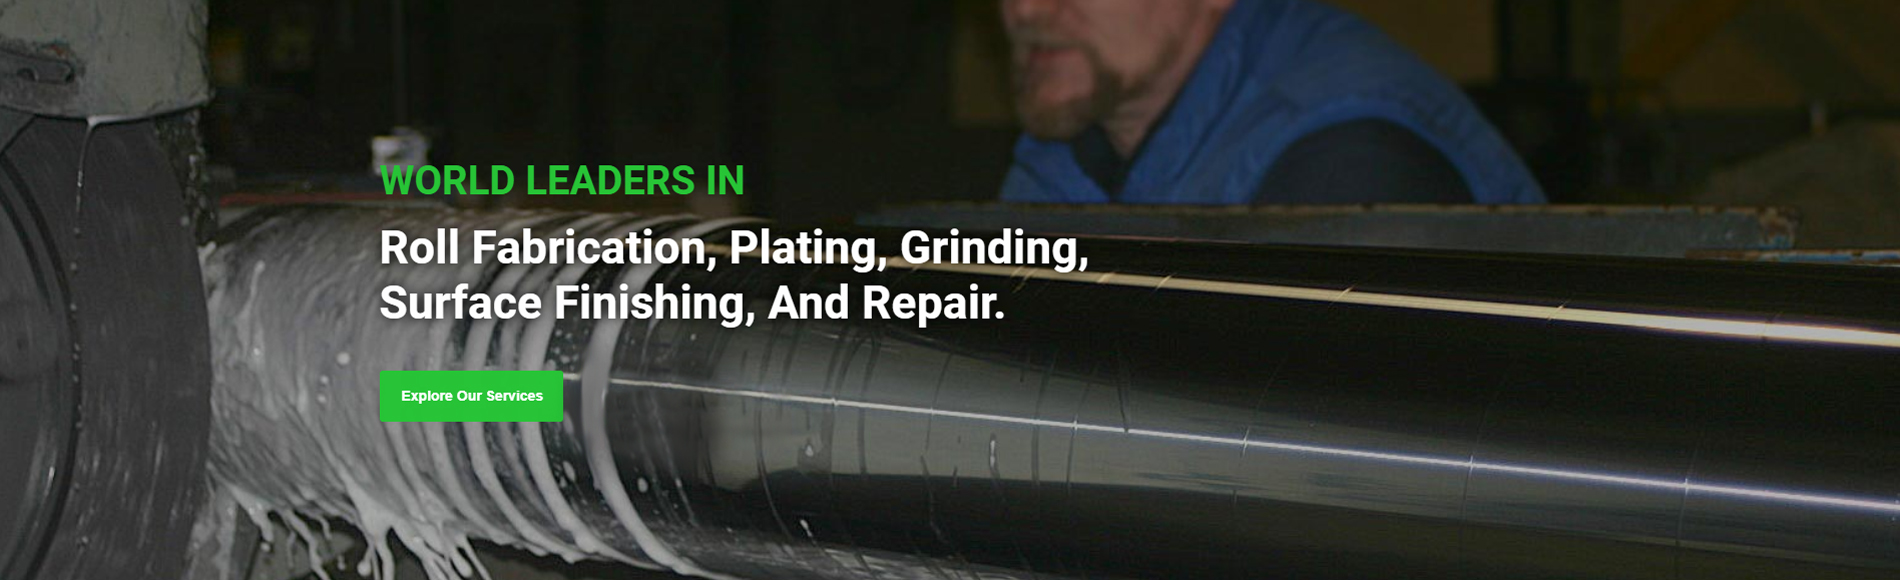 World Leaders in Roll Fabrication, Plating, Grinding, Surface Finishing, and Repair Mirror Polishing and Plating